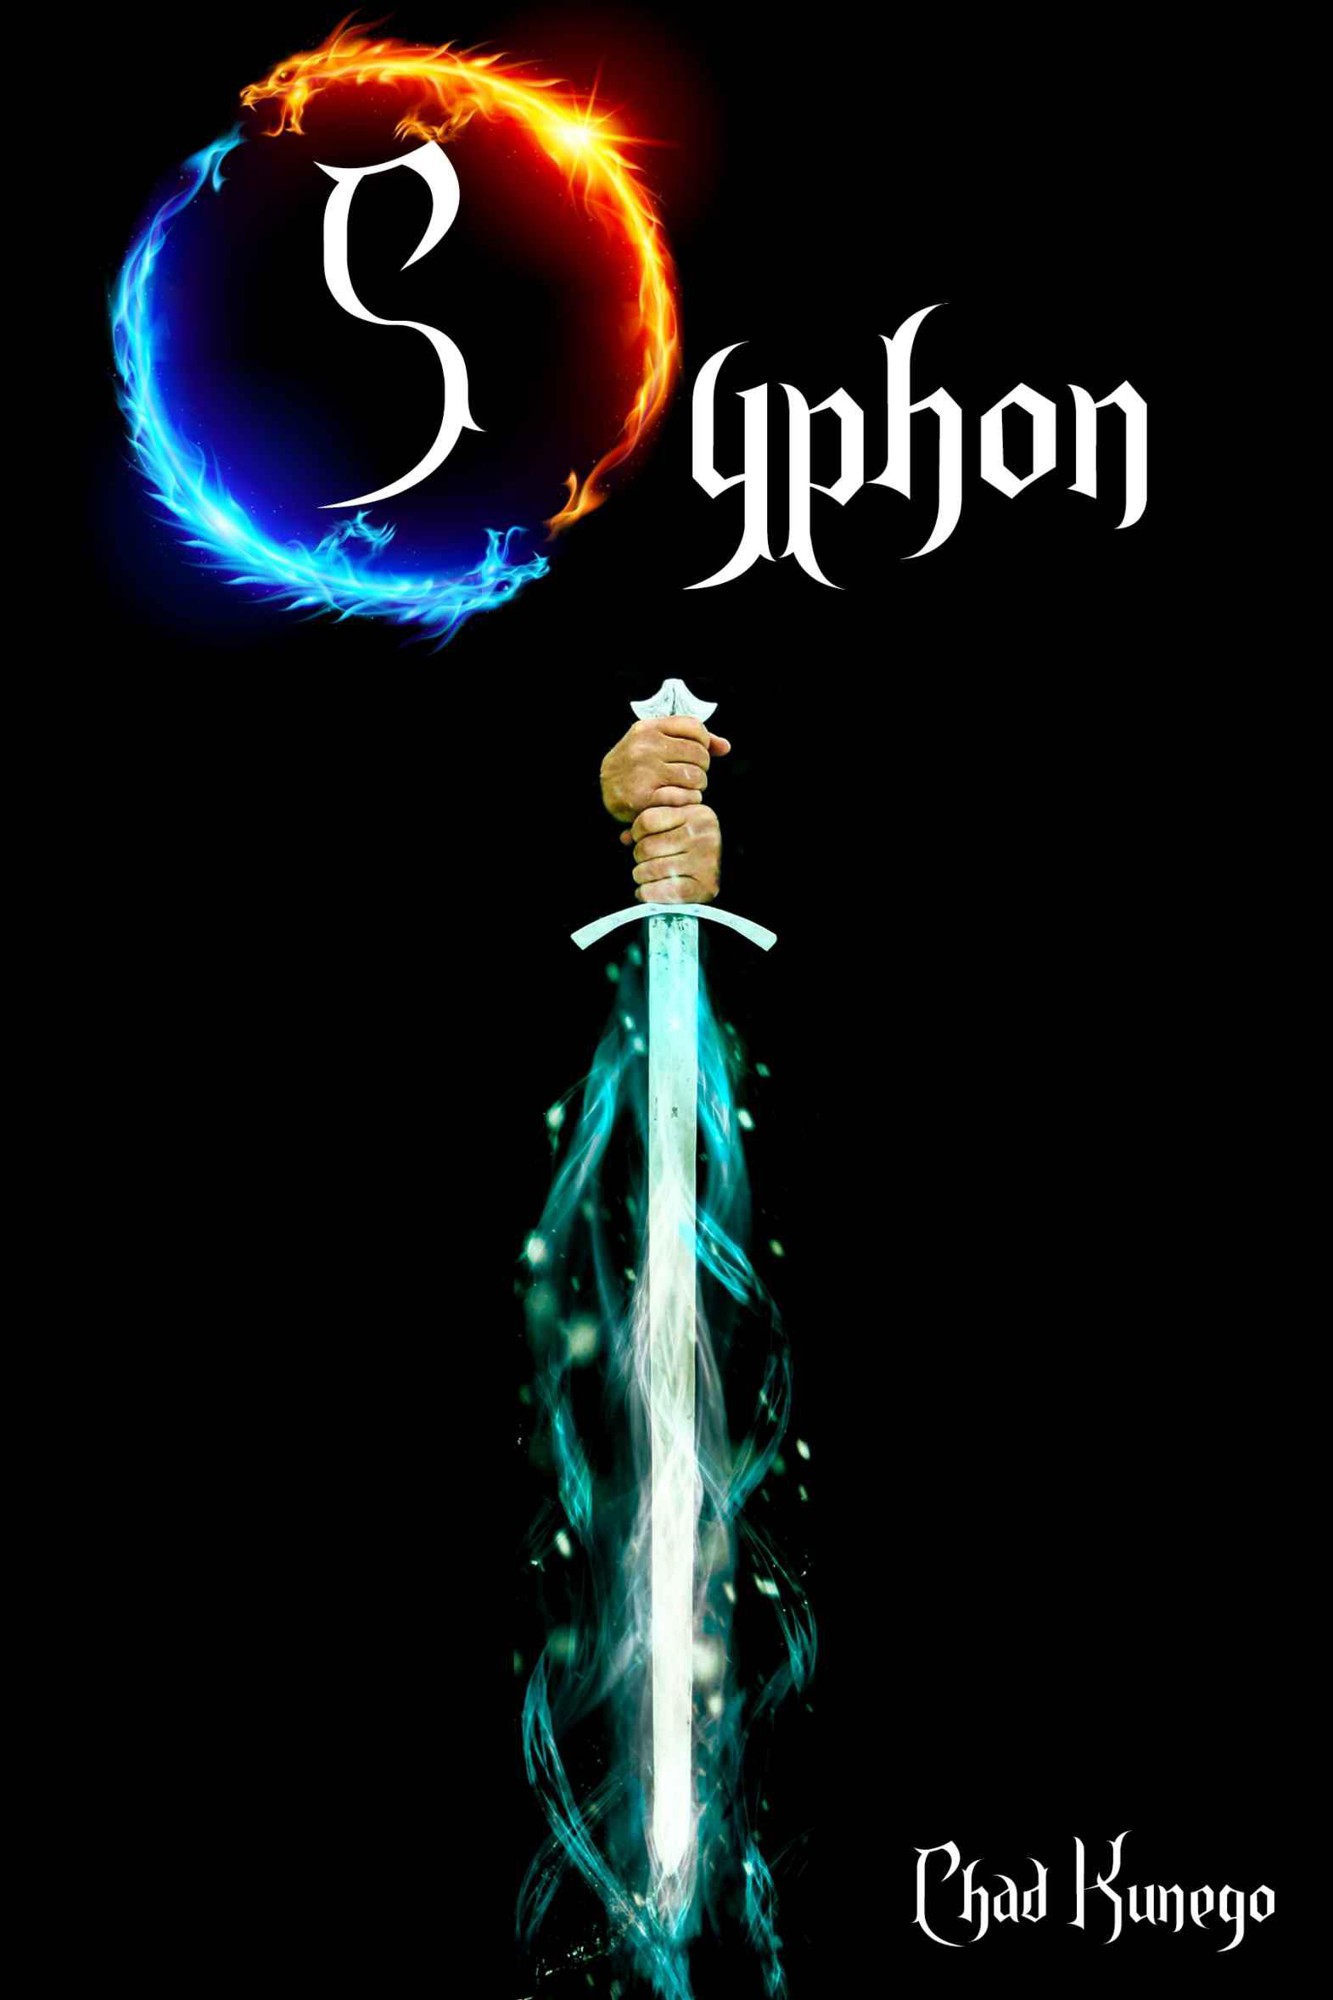 Syphon: Guardians of the Fractured Realms